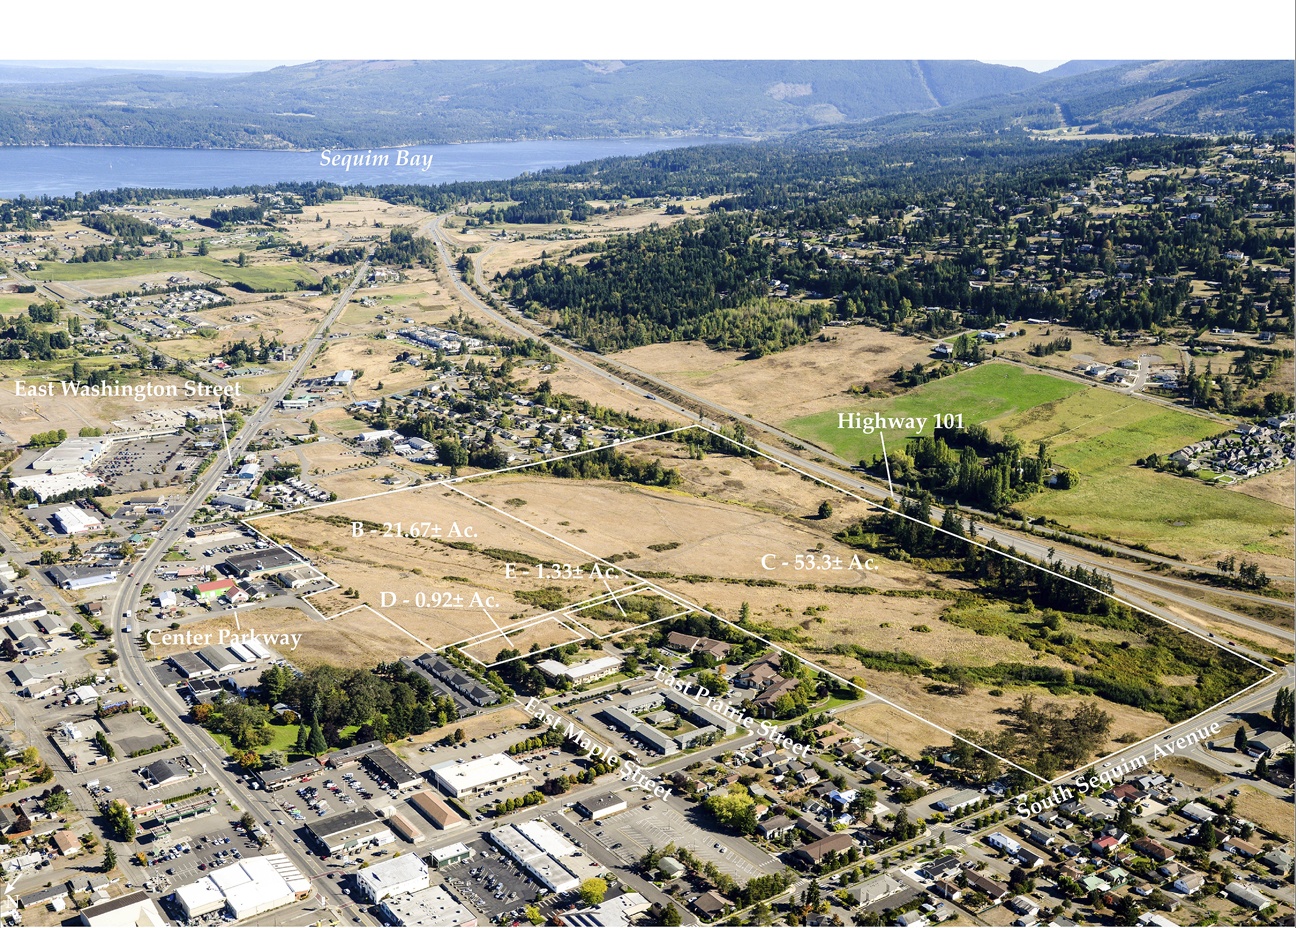 Mark Burrowes, co-owner of Bell Creek Village, a 77-plus acre property along Sequim Avenue, said he’s auctioning off the property for personal reasons but he’s optimistic a sale will go through. “It’s a great piece of property,” he said. “Whoever comes in, I’m sure will be a good fit for Sequim.” (Realty Marketing Northwest)